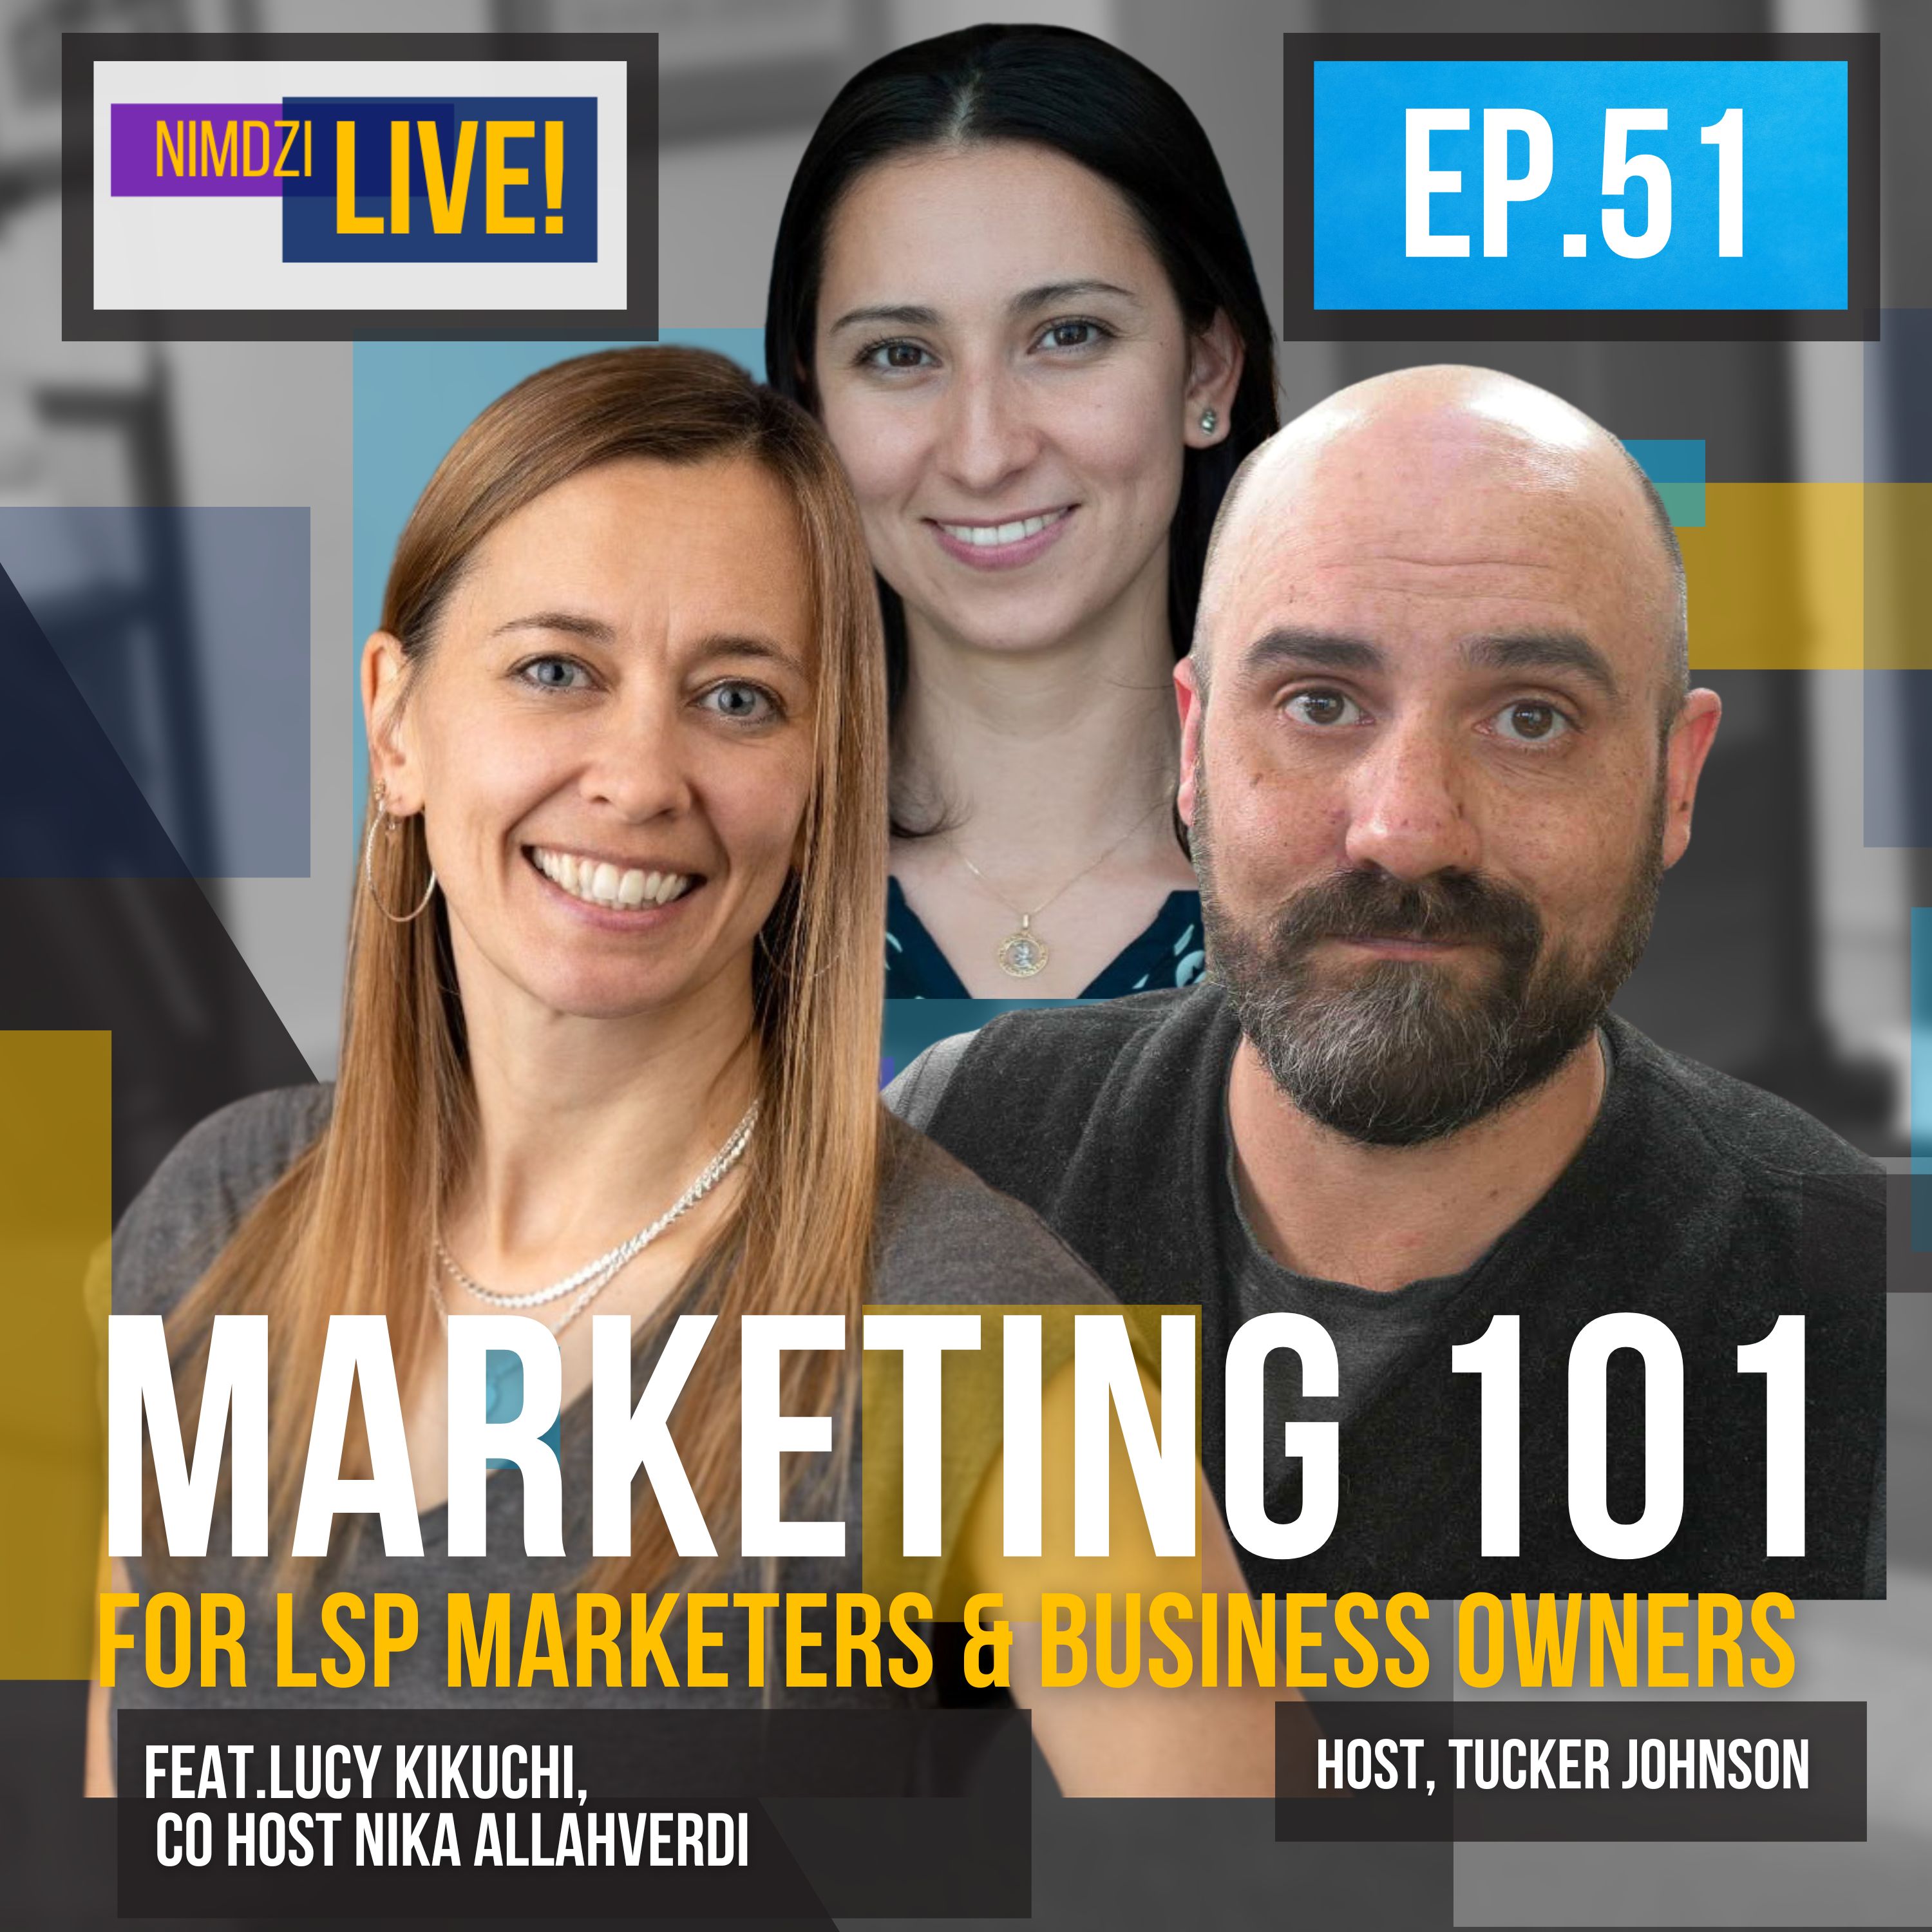 Marketing 101 for LSP Marketers & Business Owners (Feat. Lucy Kikuchi)